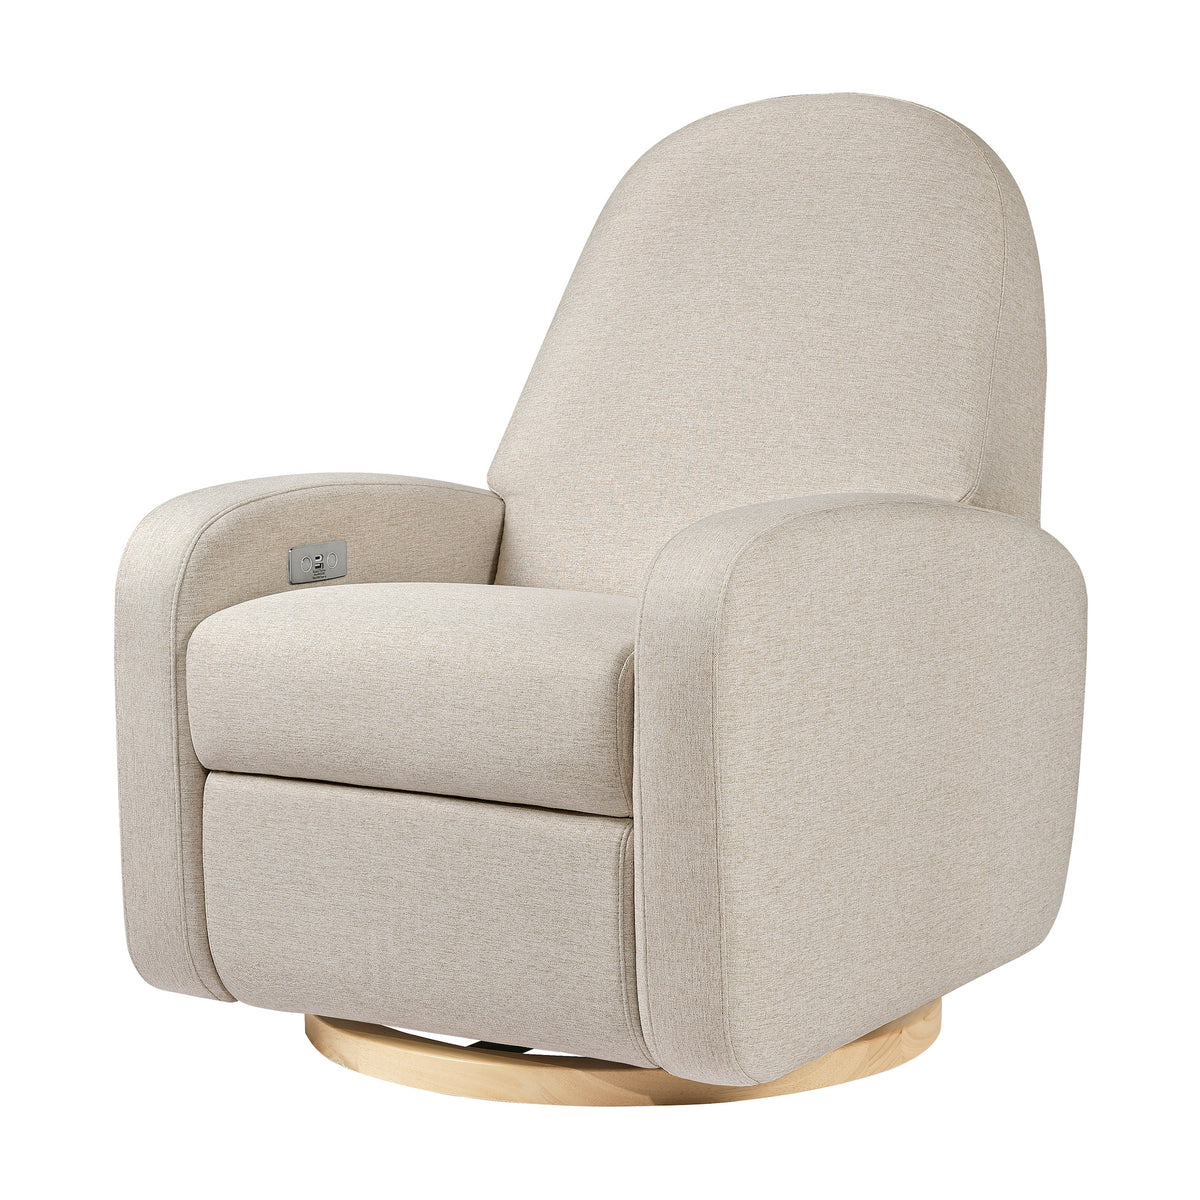 Nami Electronic Recliner + Swivel Glider in Eco-Performance Fabric with USB Port